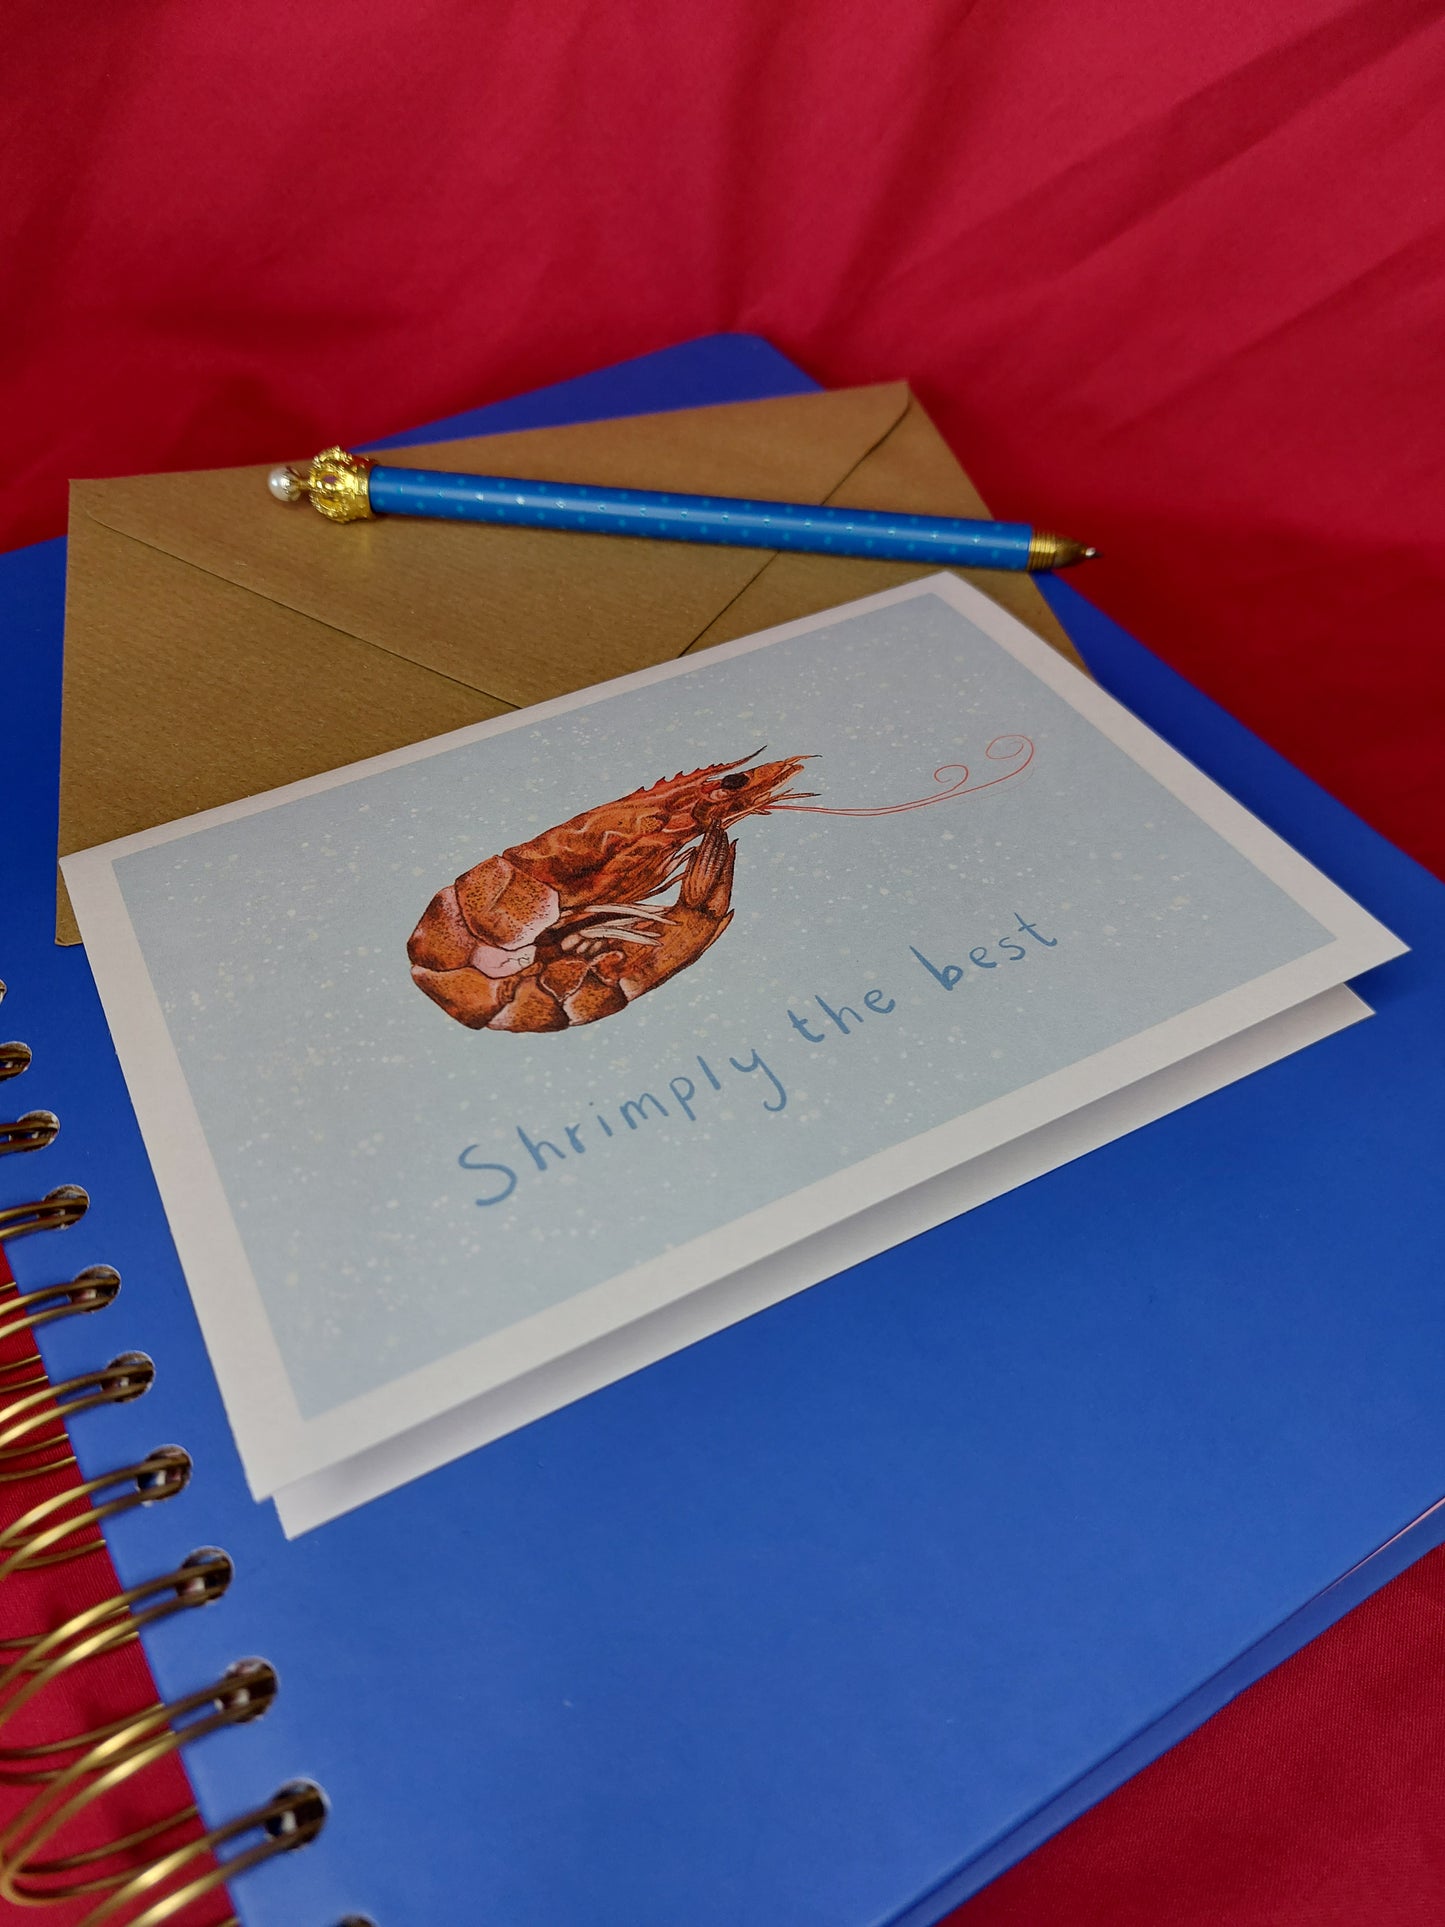 Greeting Card | Shrimply the Best